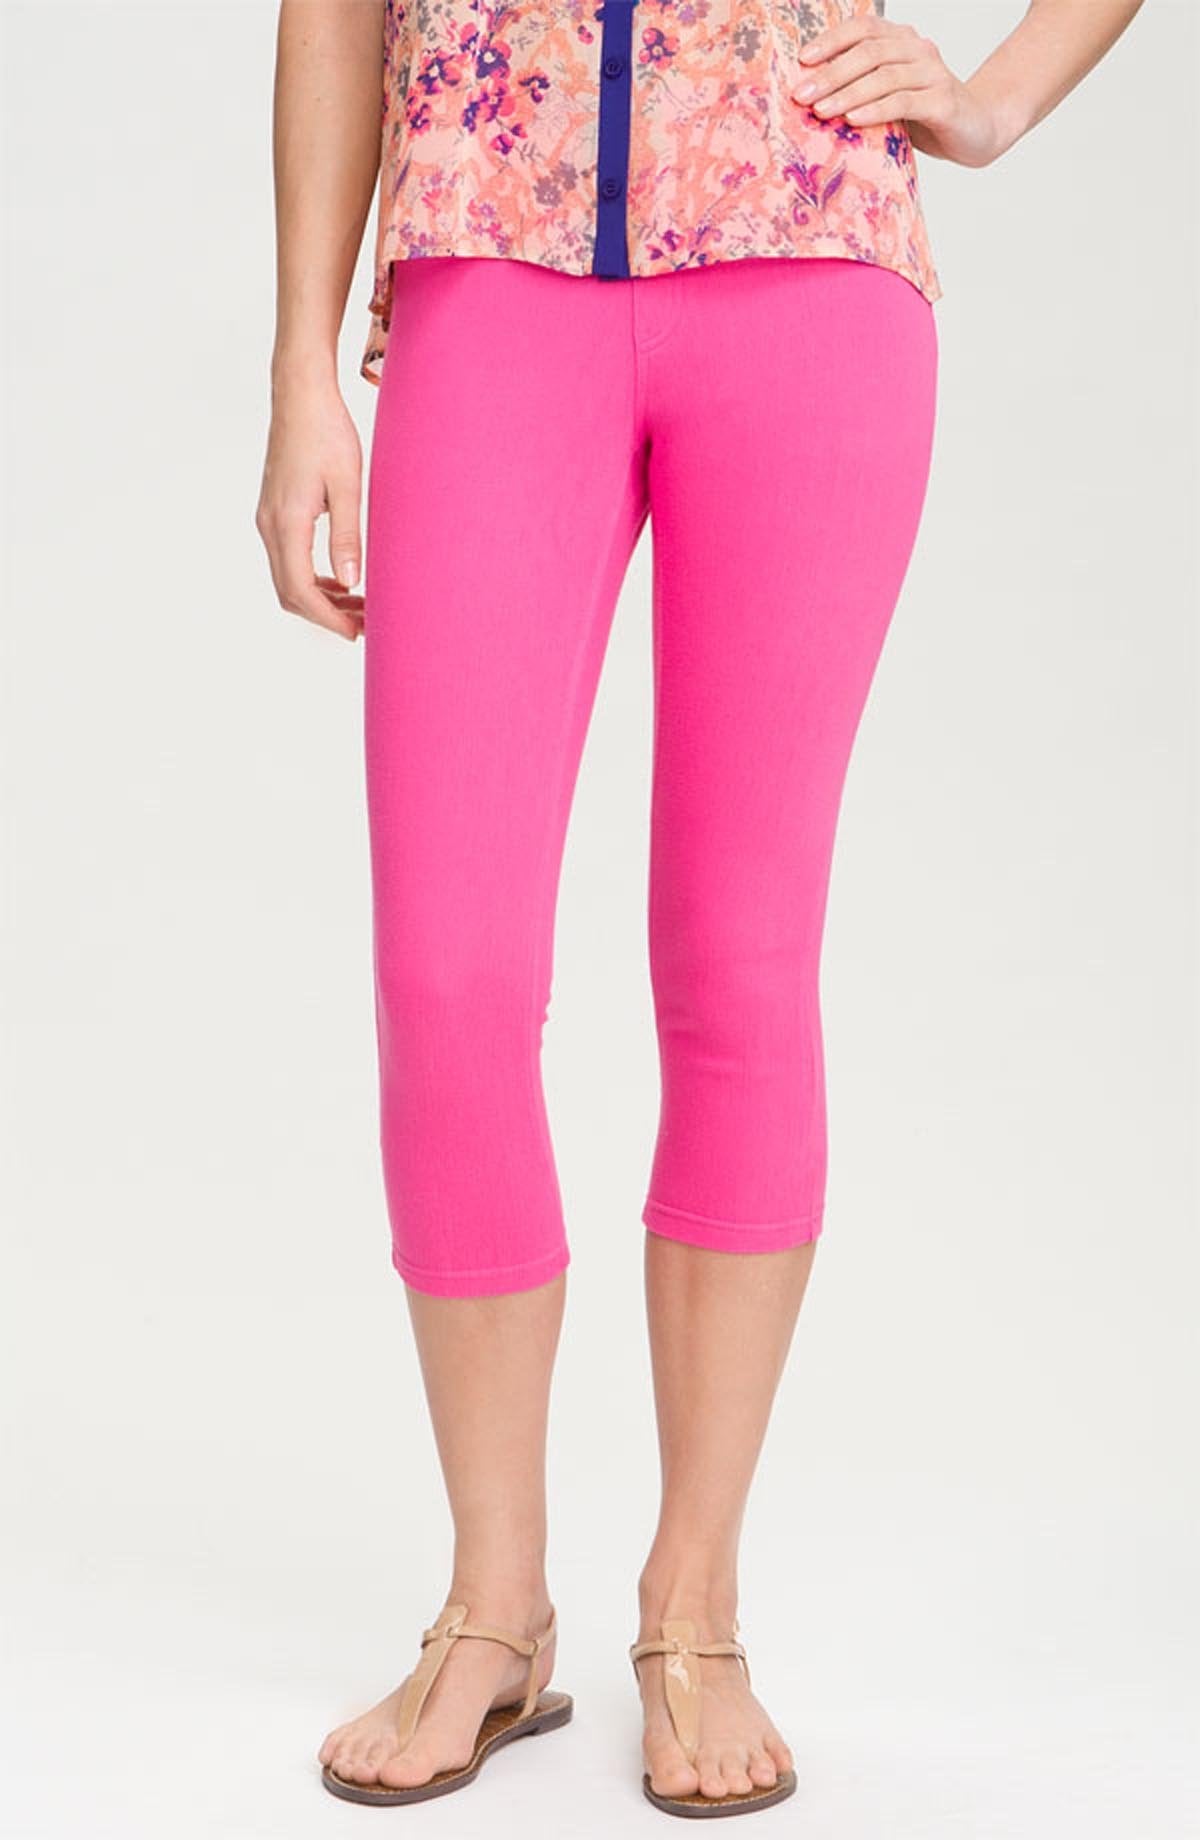 Sexy Skinny Cotton Stretch Colored Legging Basic Crop Pants Capris